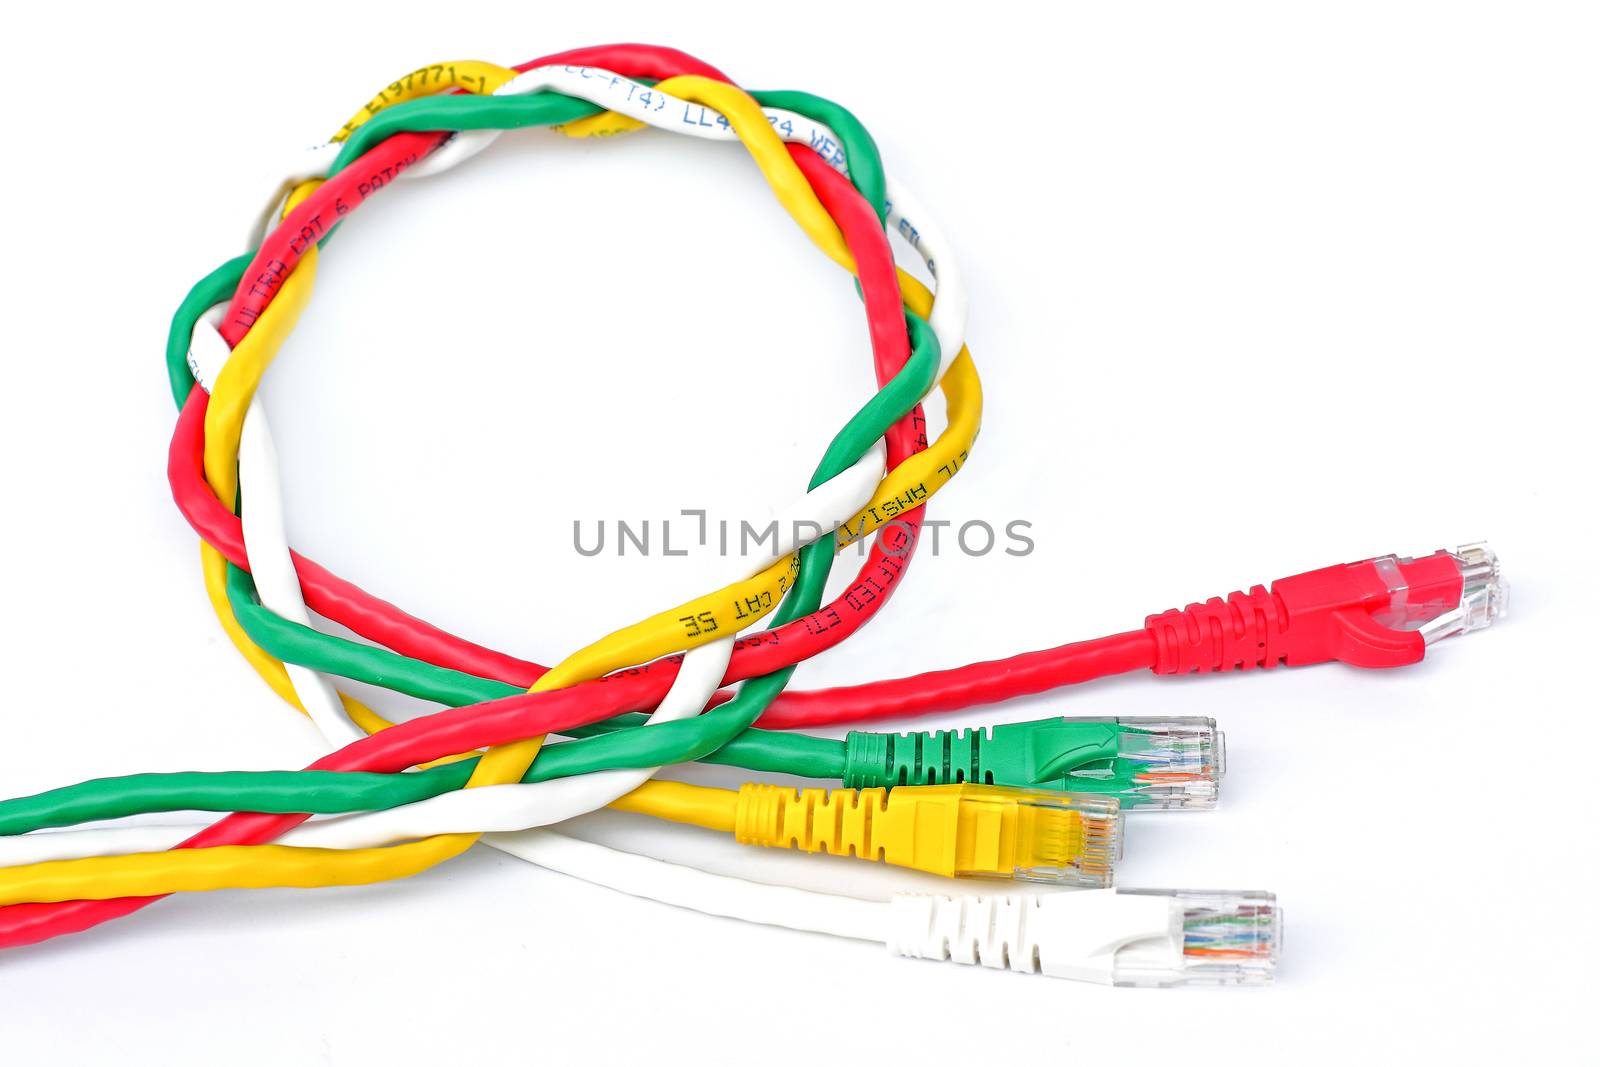 USB cable isolated on white background